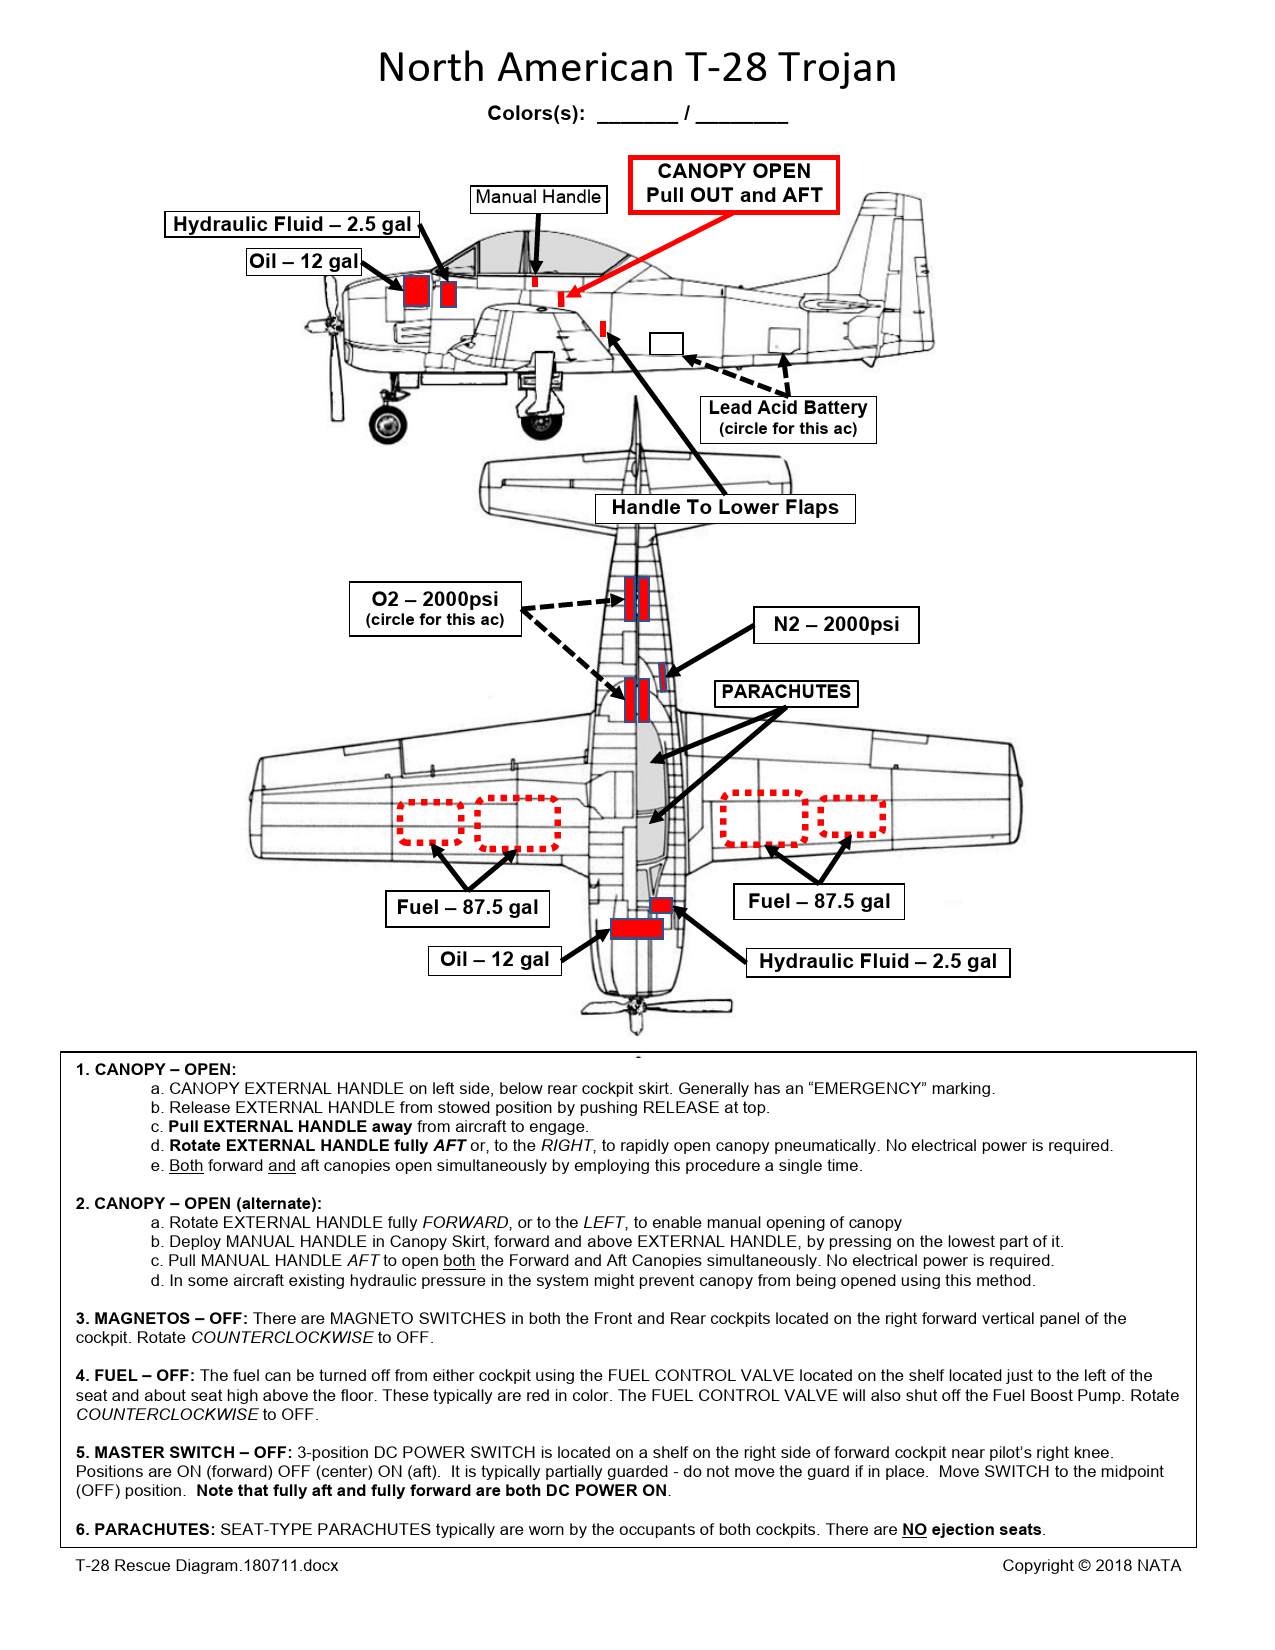 Sample page 1 from AirCorps Library document: T-28 Rescue Diagram